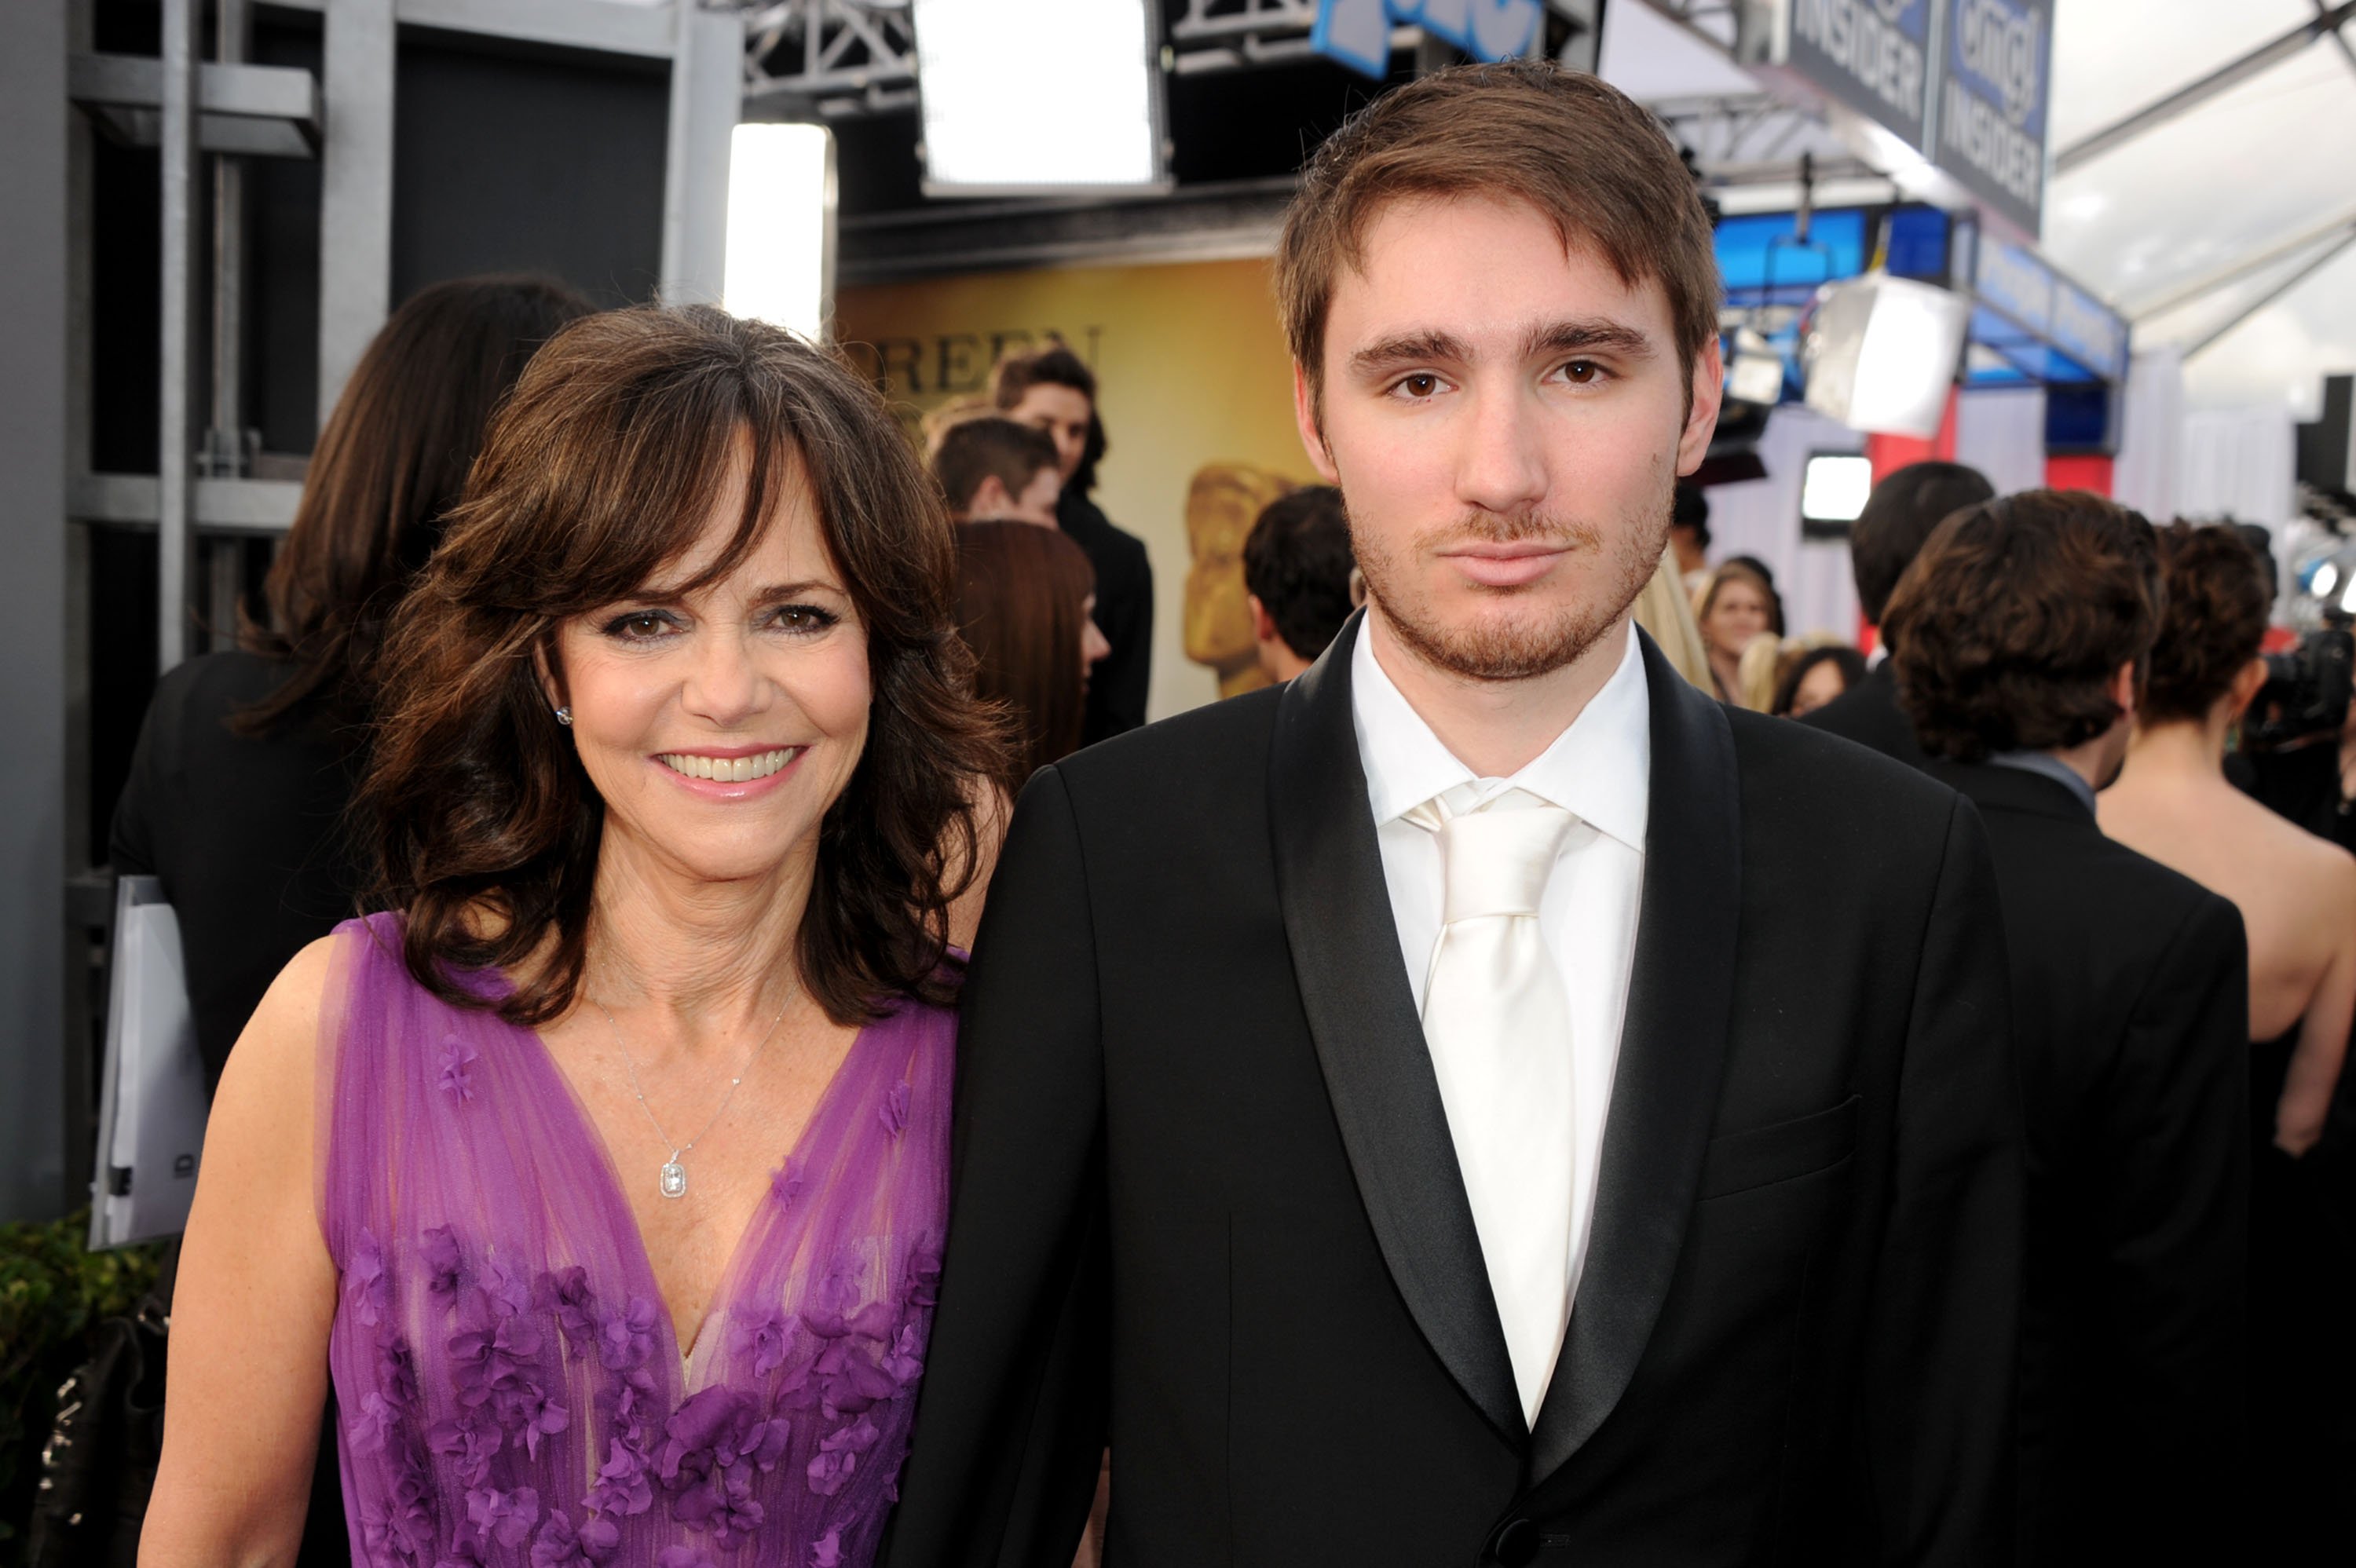 Actress Sally Field and son, Sam Greisman attend the 19th Annual Screen Actors Guild Awards at The Shrine Auditorium on January 27, 2013 in Los Angeles, California. | Source: Getty Images